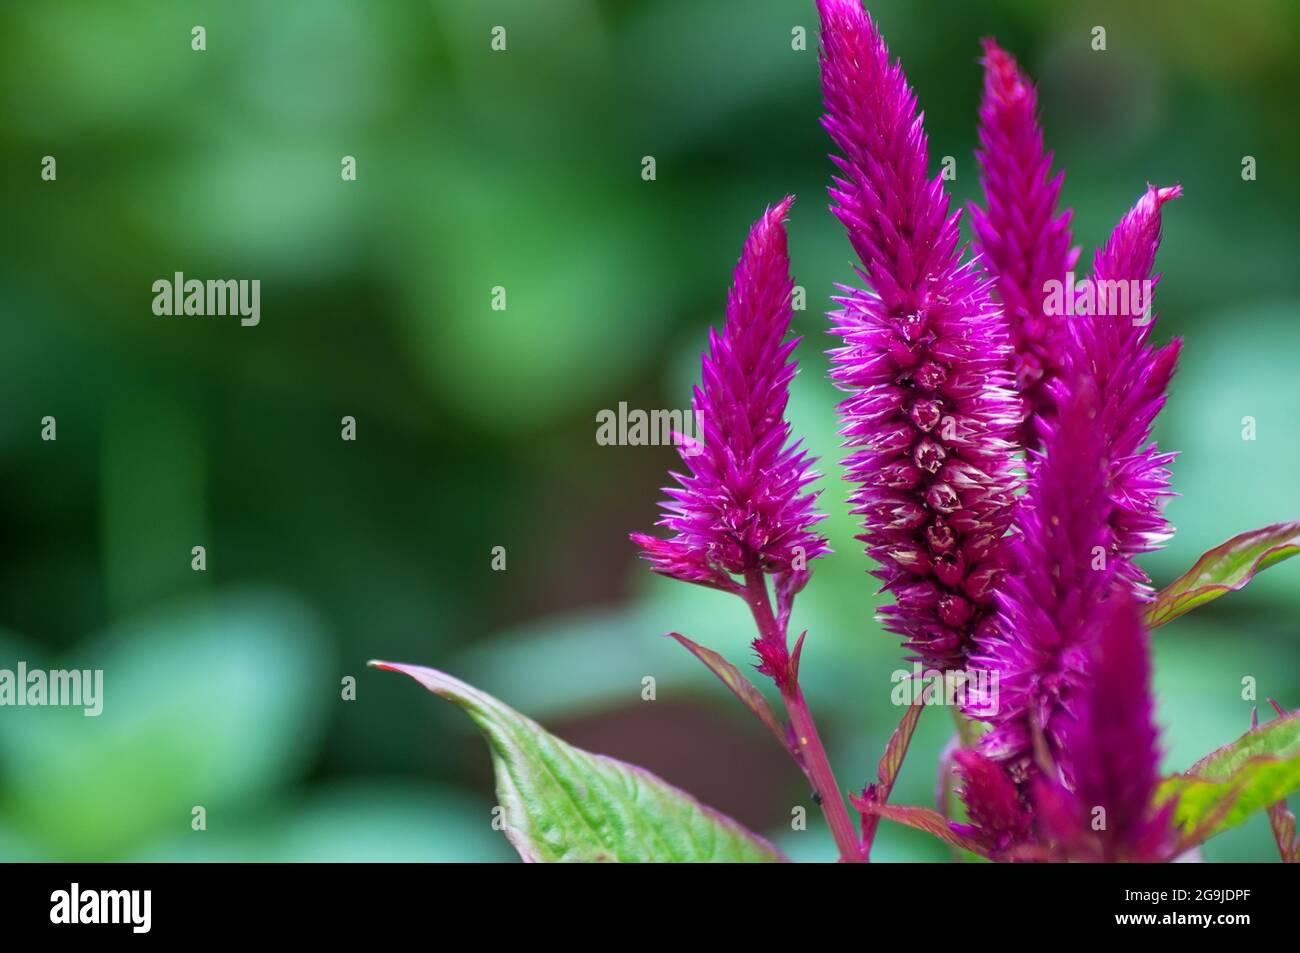 Celosia argentea also known as Plumed Cockscomb flowerbed Stock Photo